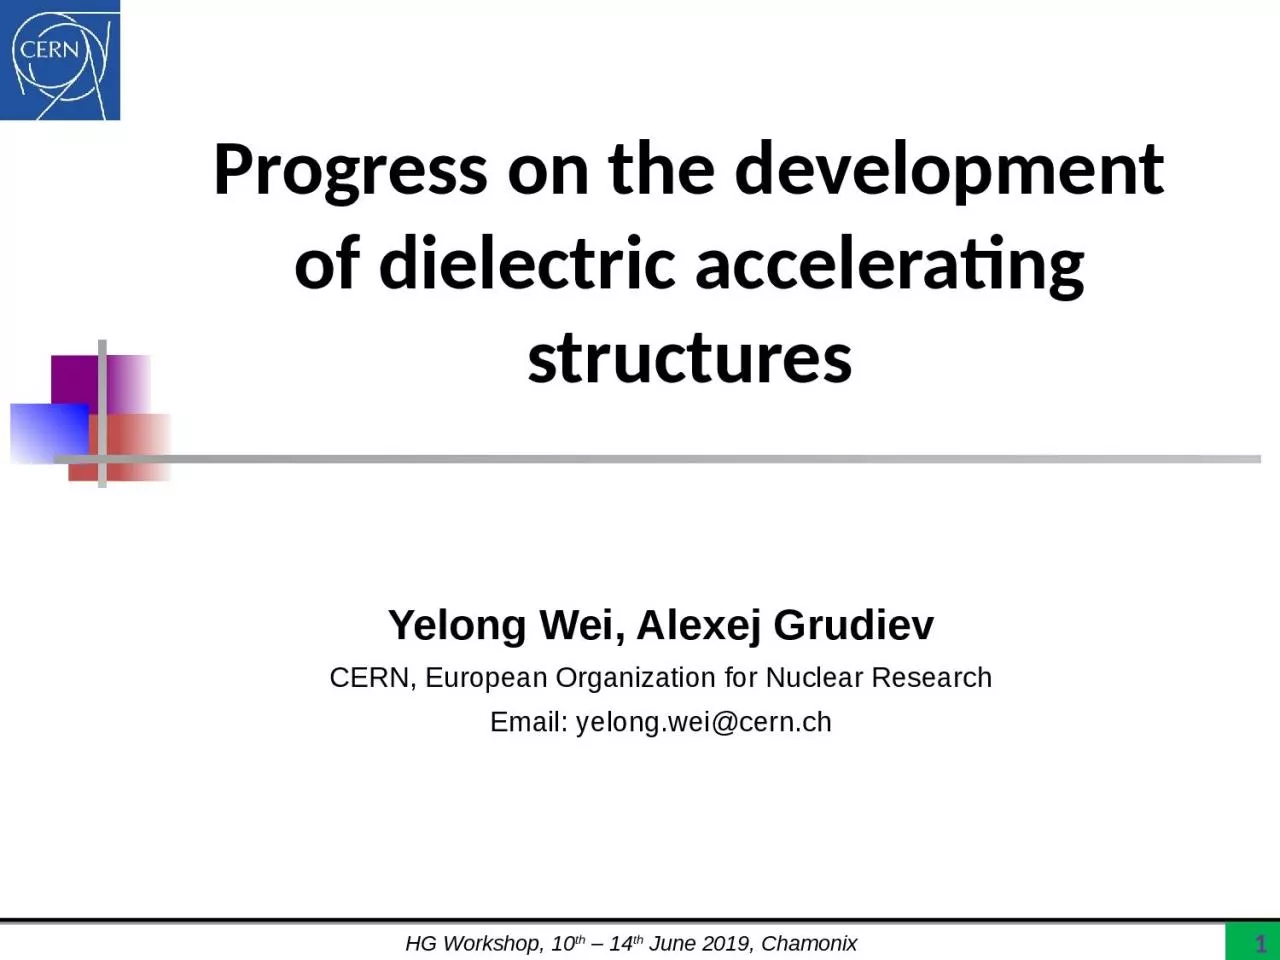 Progress on the development of dielectric accelerating structures